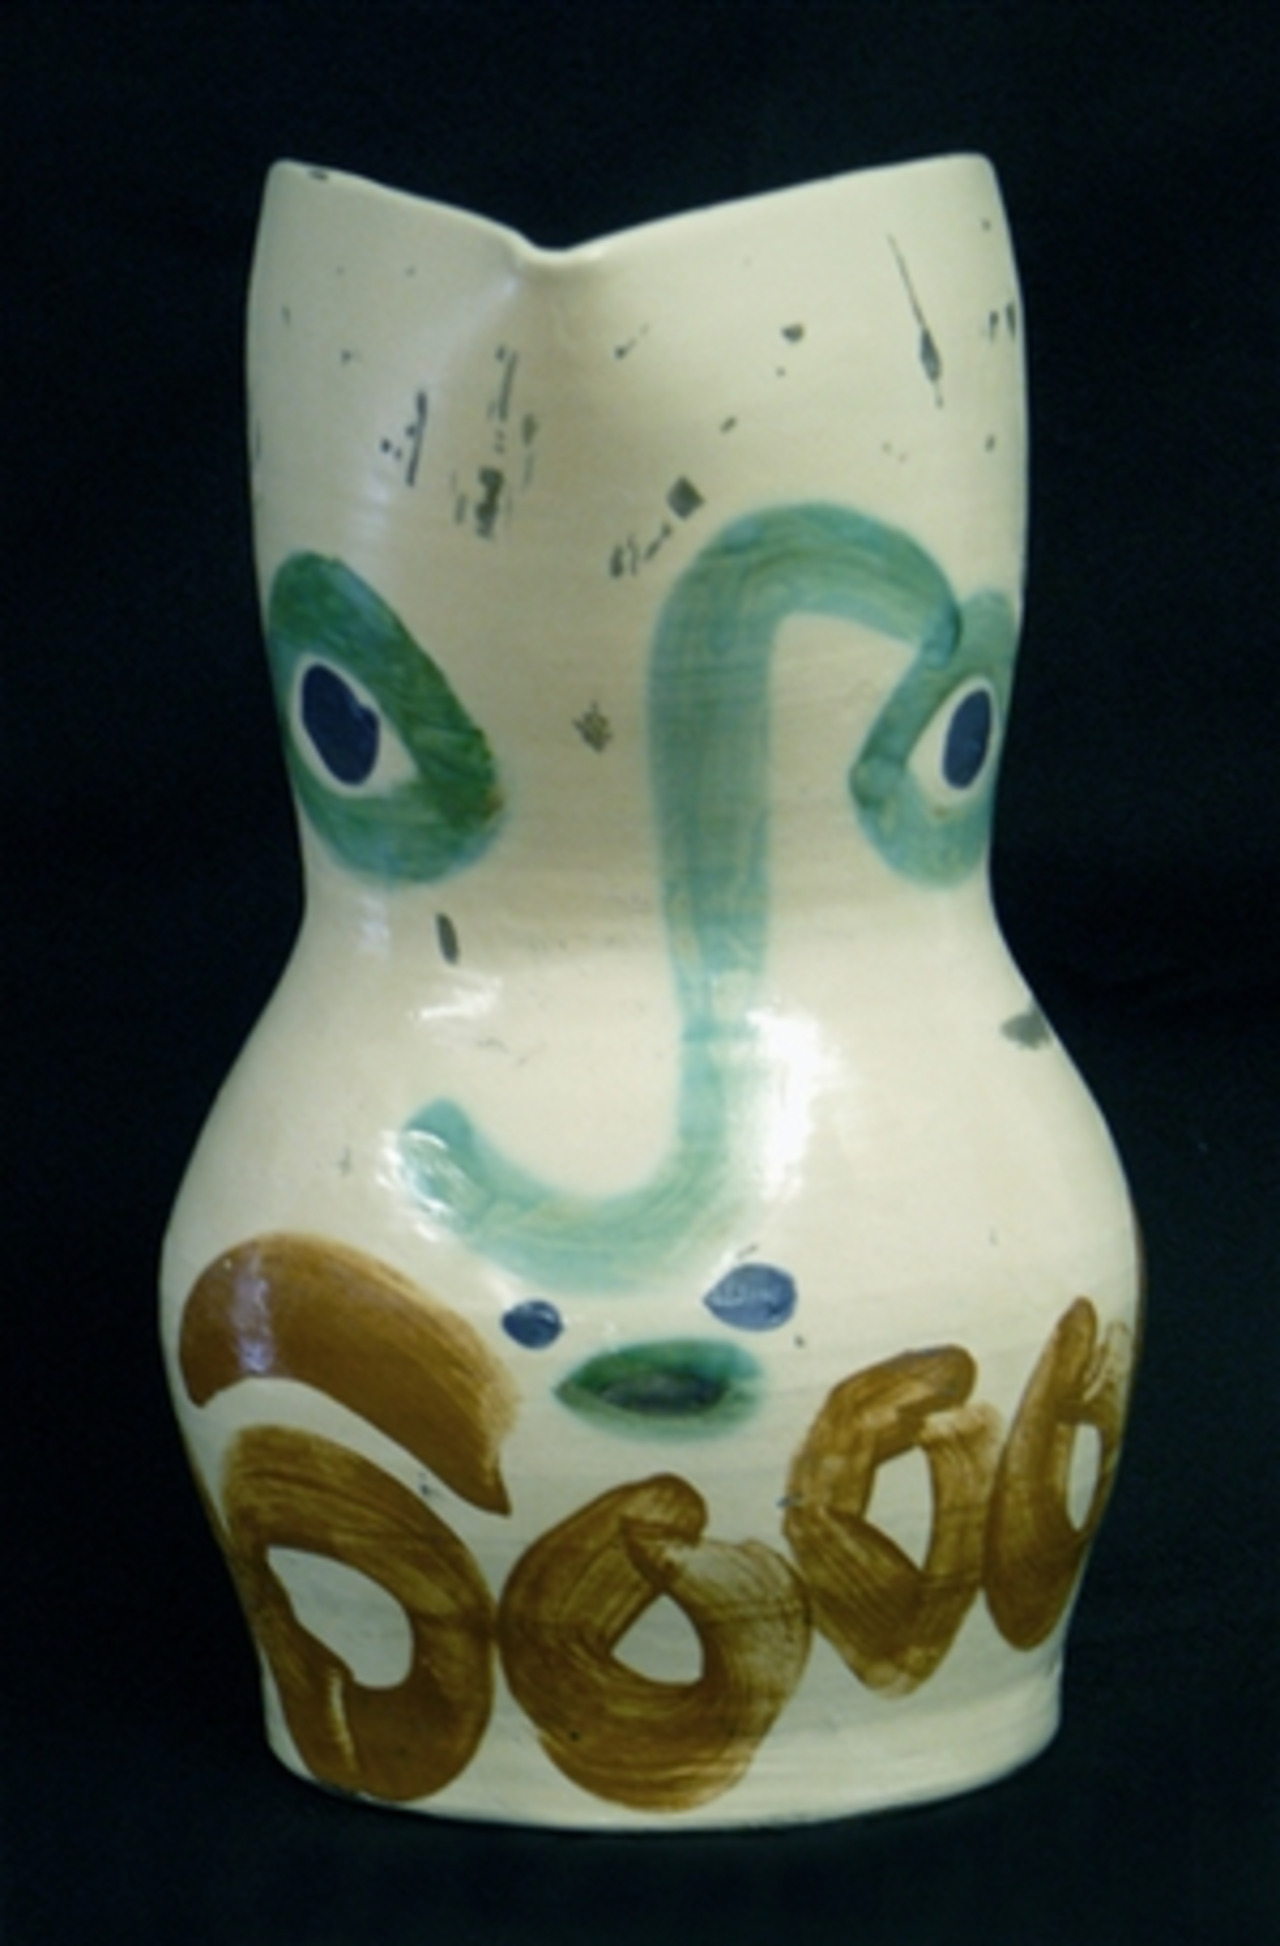 #PabloPicasso ceramics have finally been moved into the gallery! #Ceramics #Art http://t.co/AjIc4w2LGr